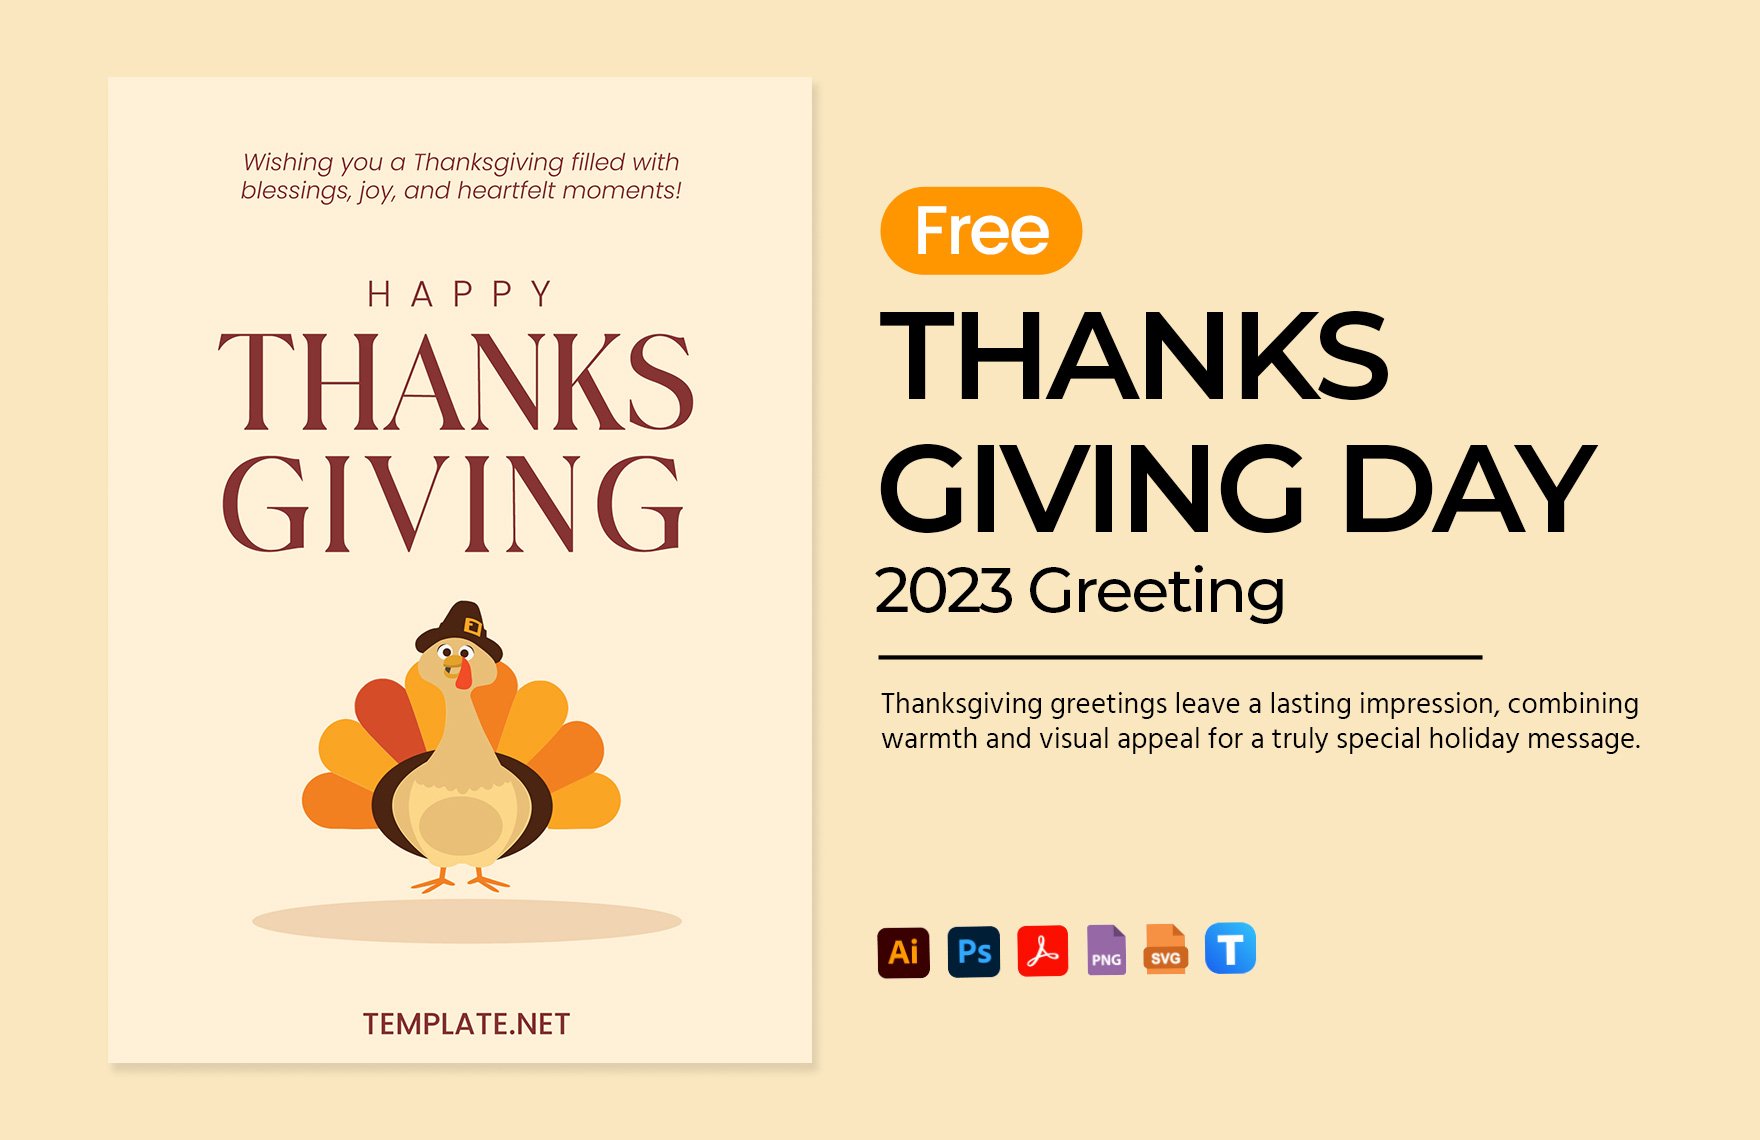 Greetings for Thanksgiving Day 2023